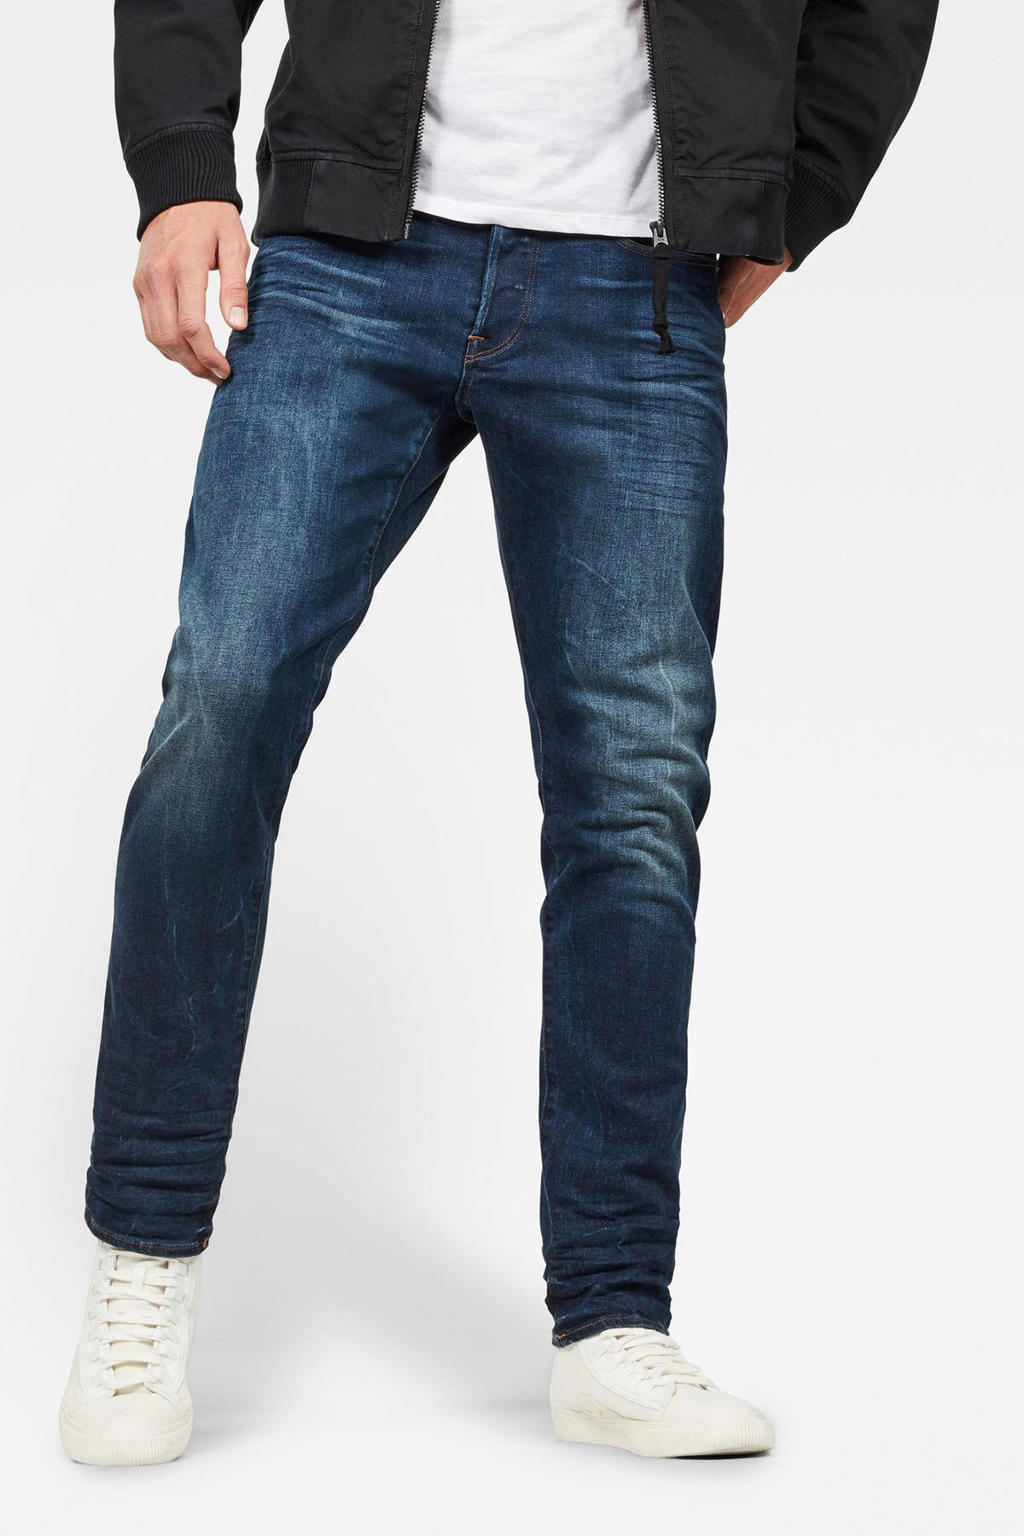 G-Star RAW 3301 straight fit jeans dk aged